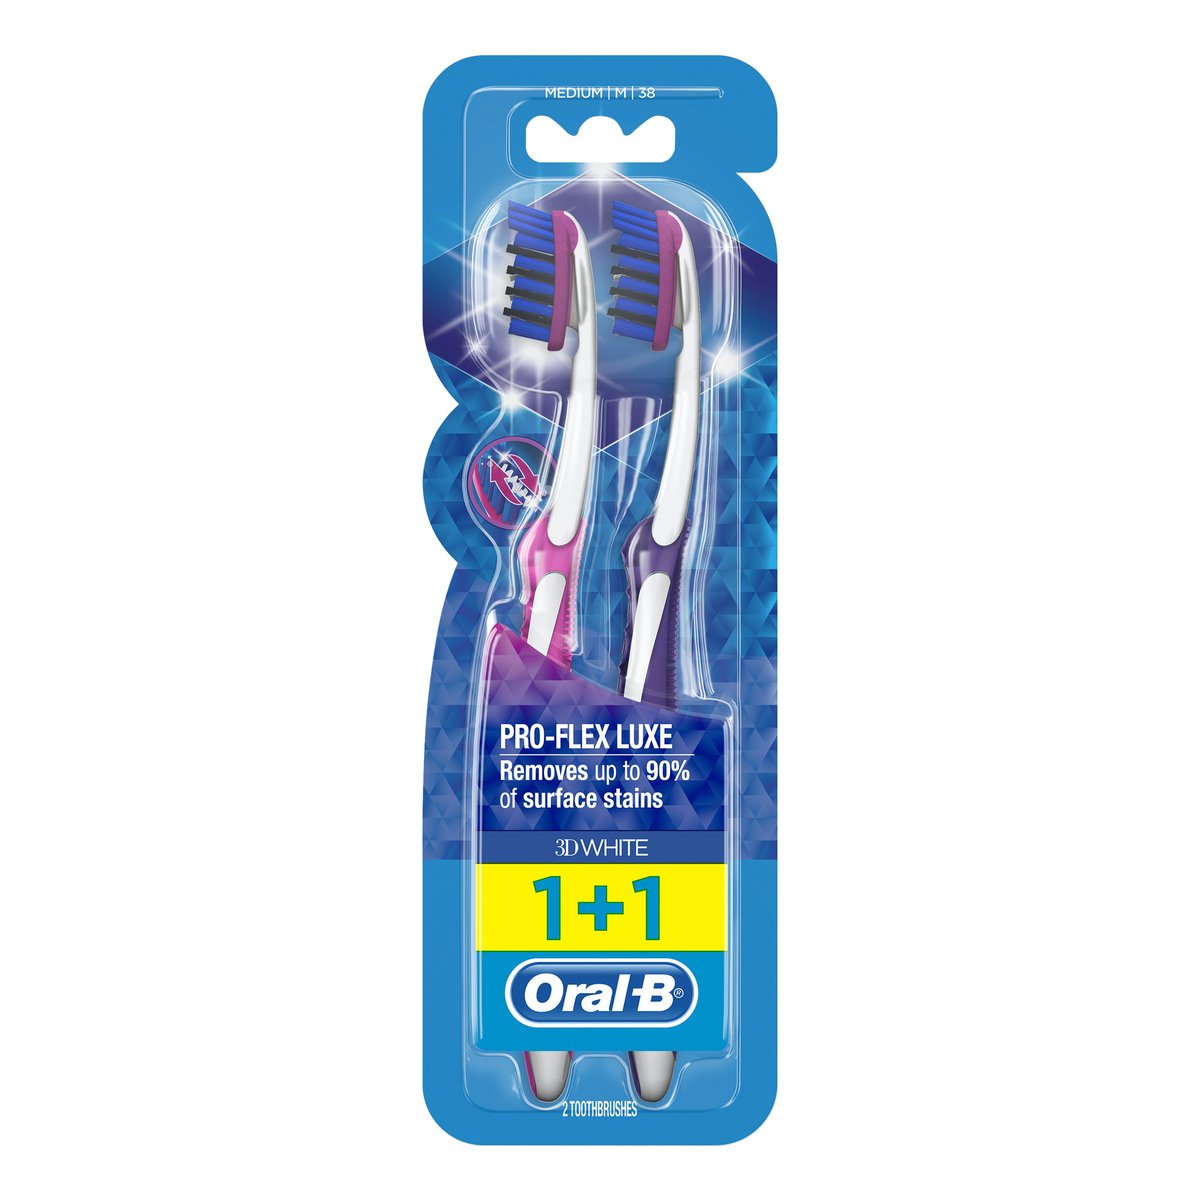 Oral B Proflex Luxe Medium Toothbrush 1 + 1 Assorted Colour